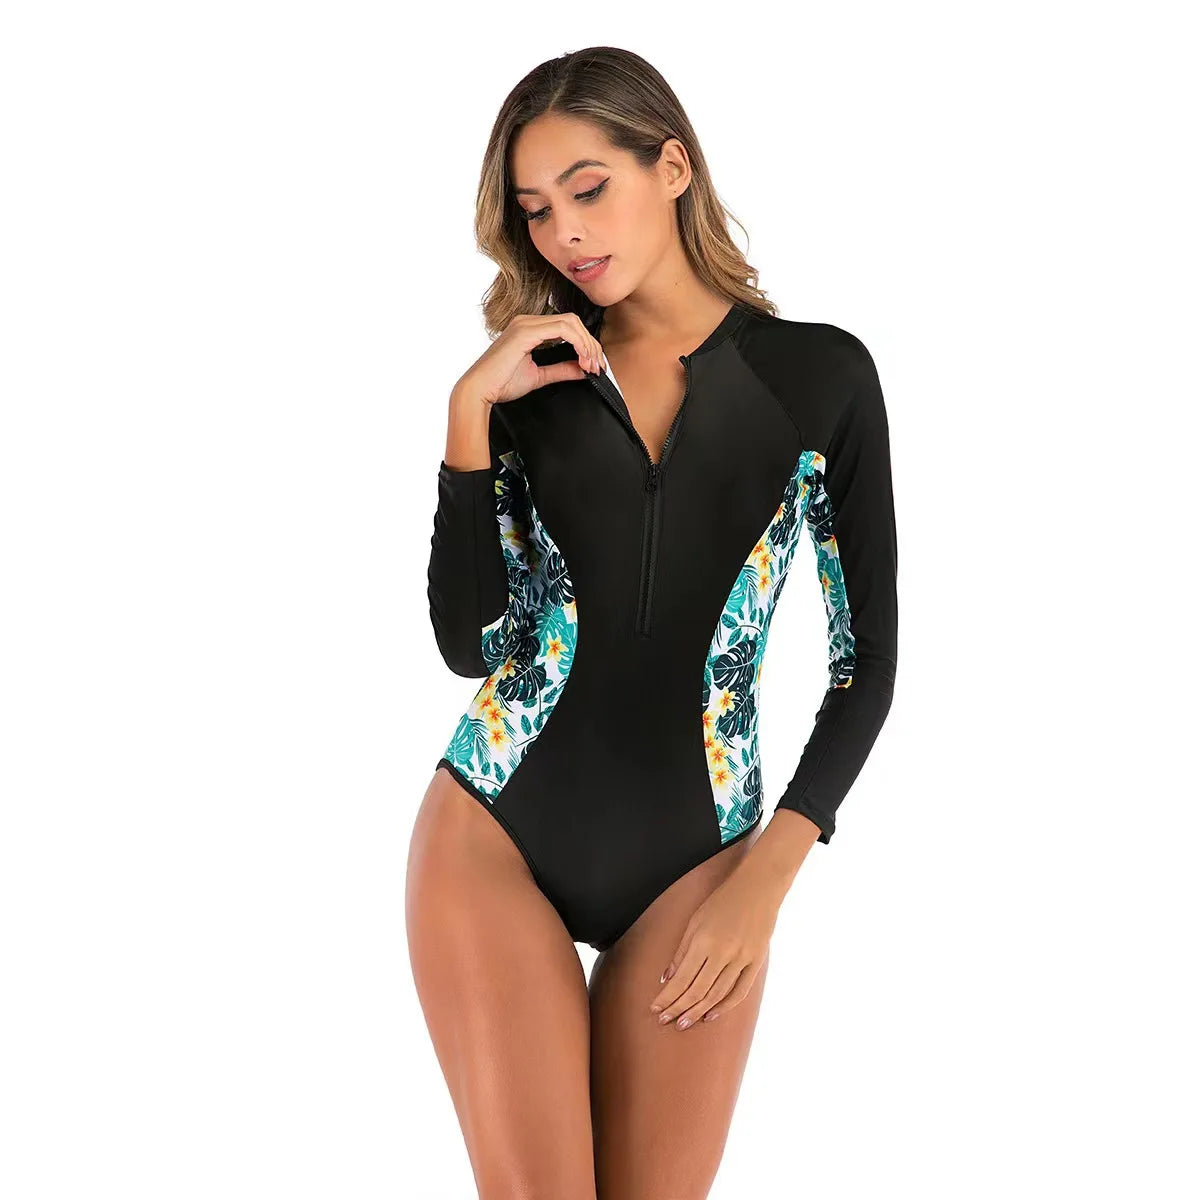 Sleeved Printed One Piece Swimsuit